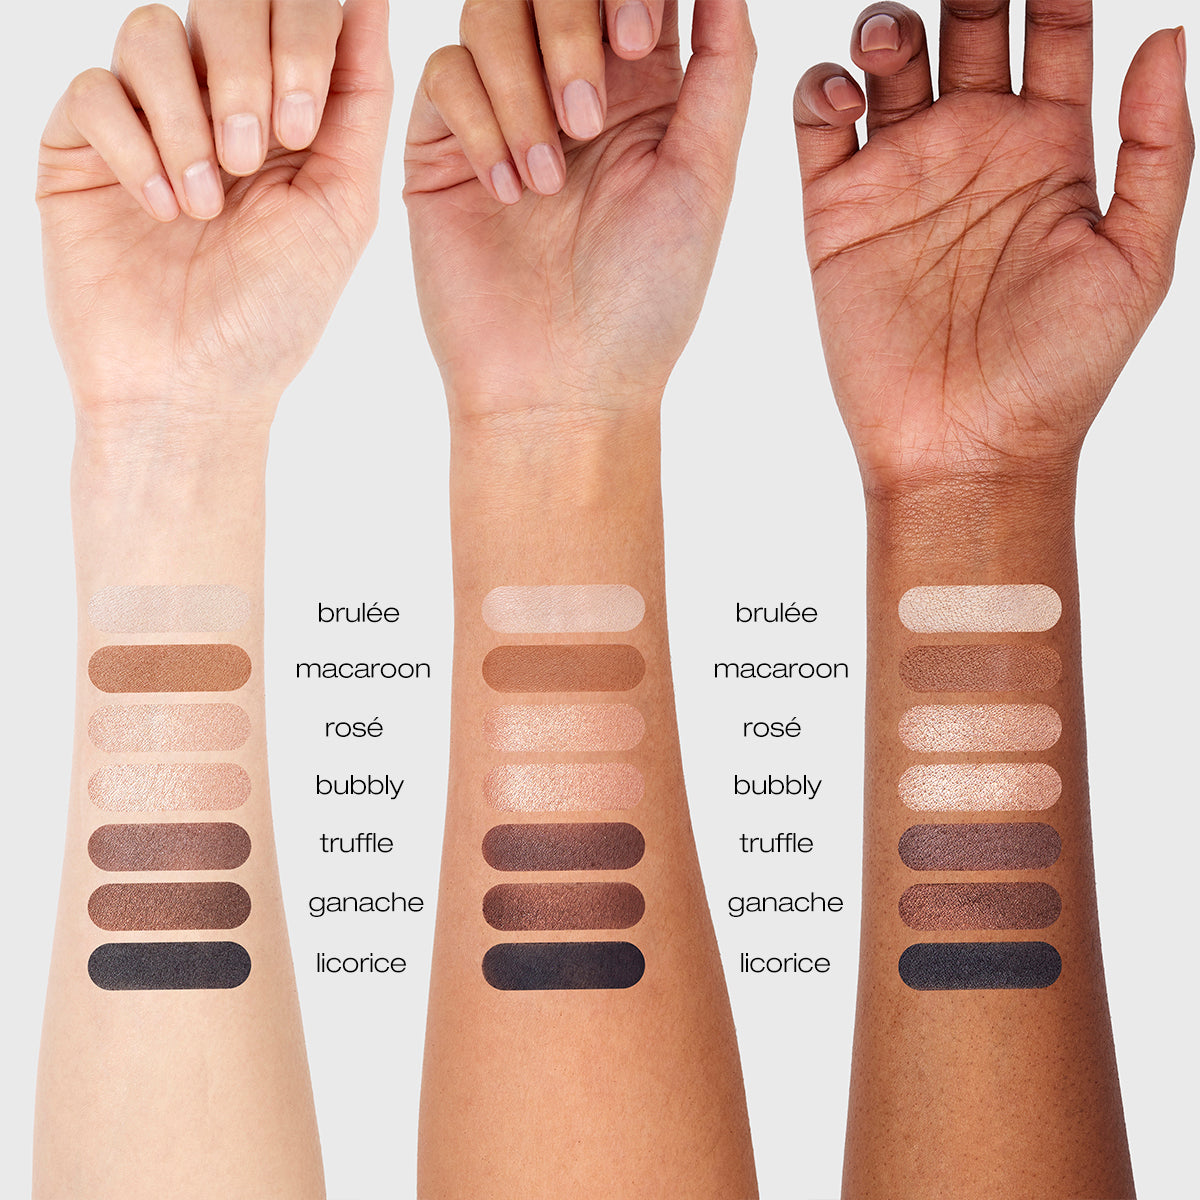 Spread of all eye shadow colors against 3 different skin tones